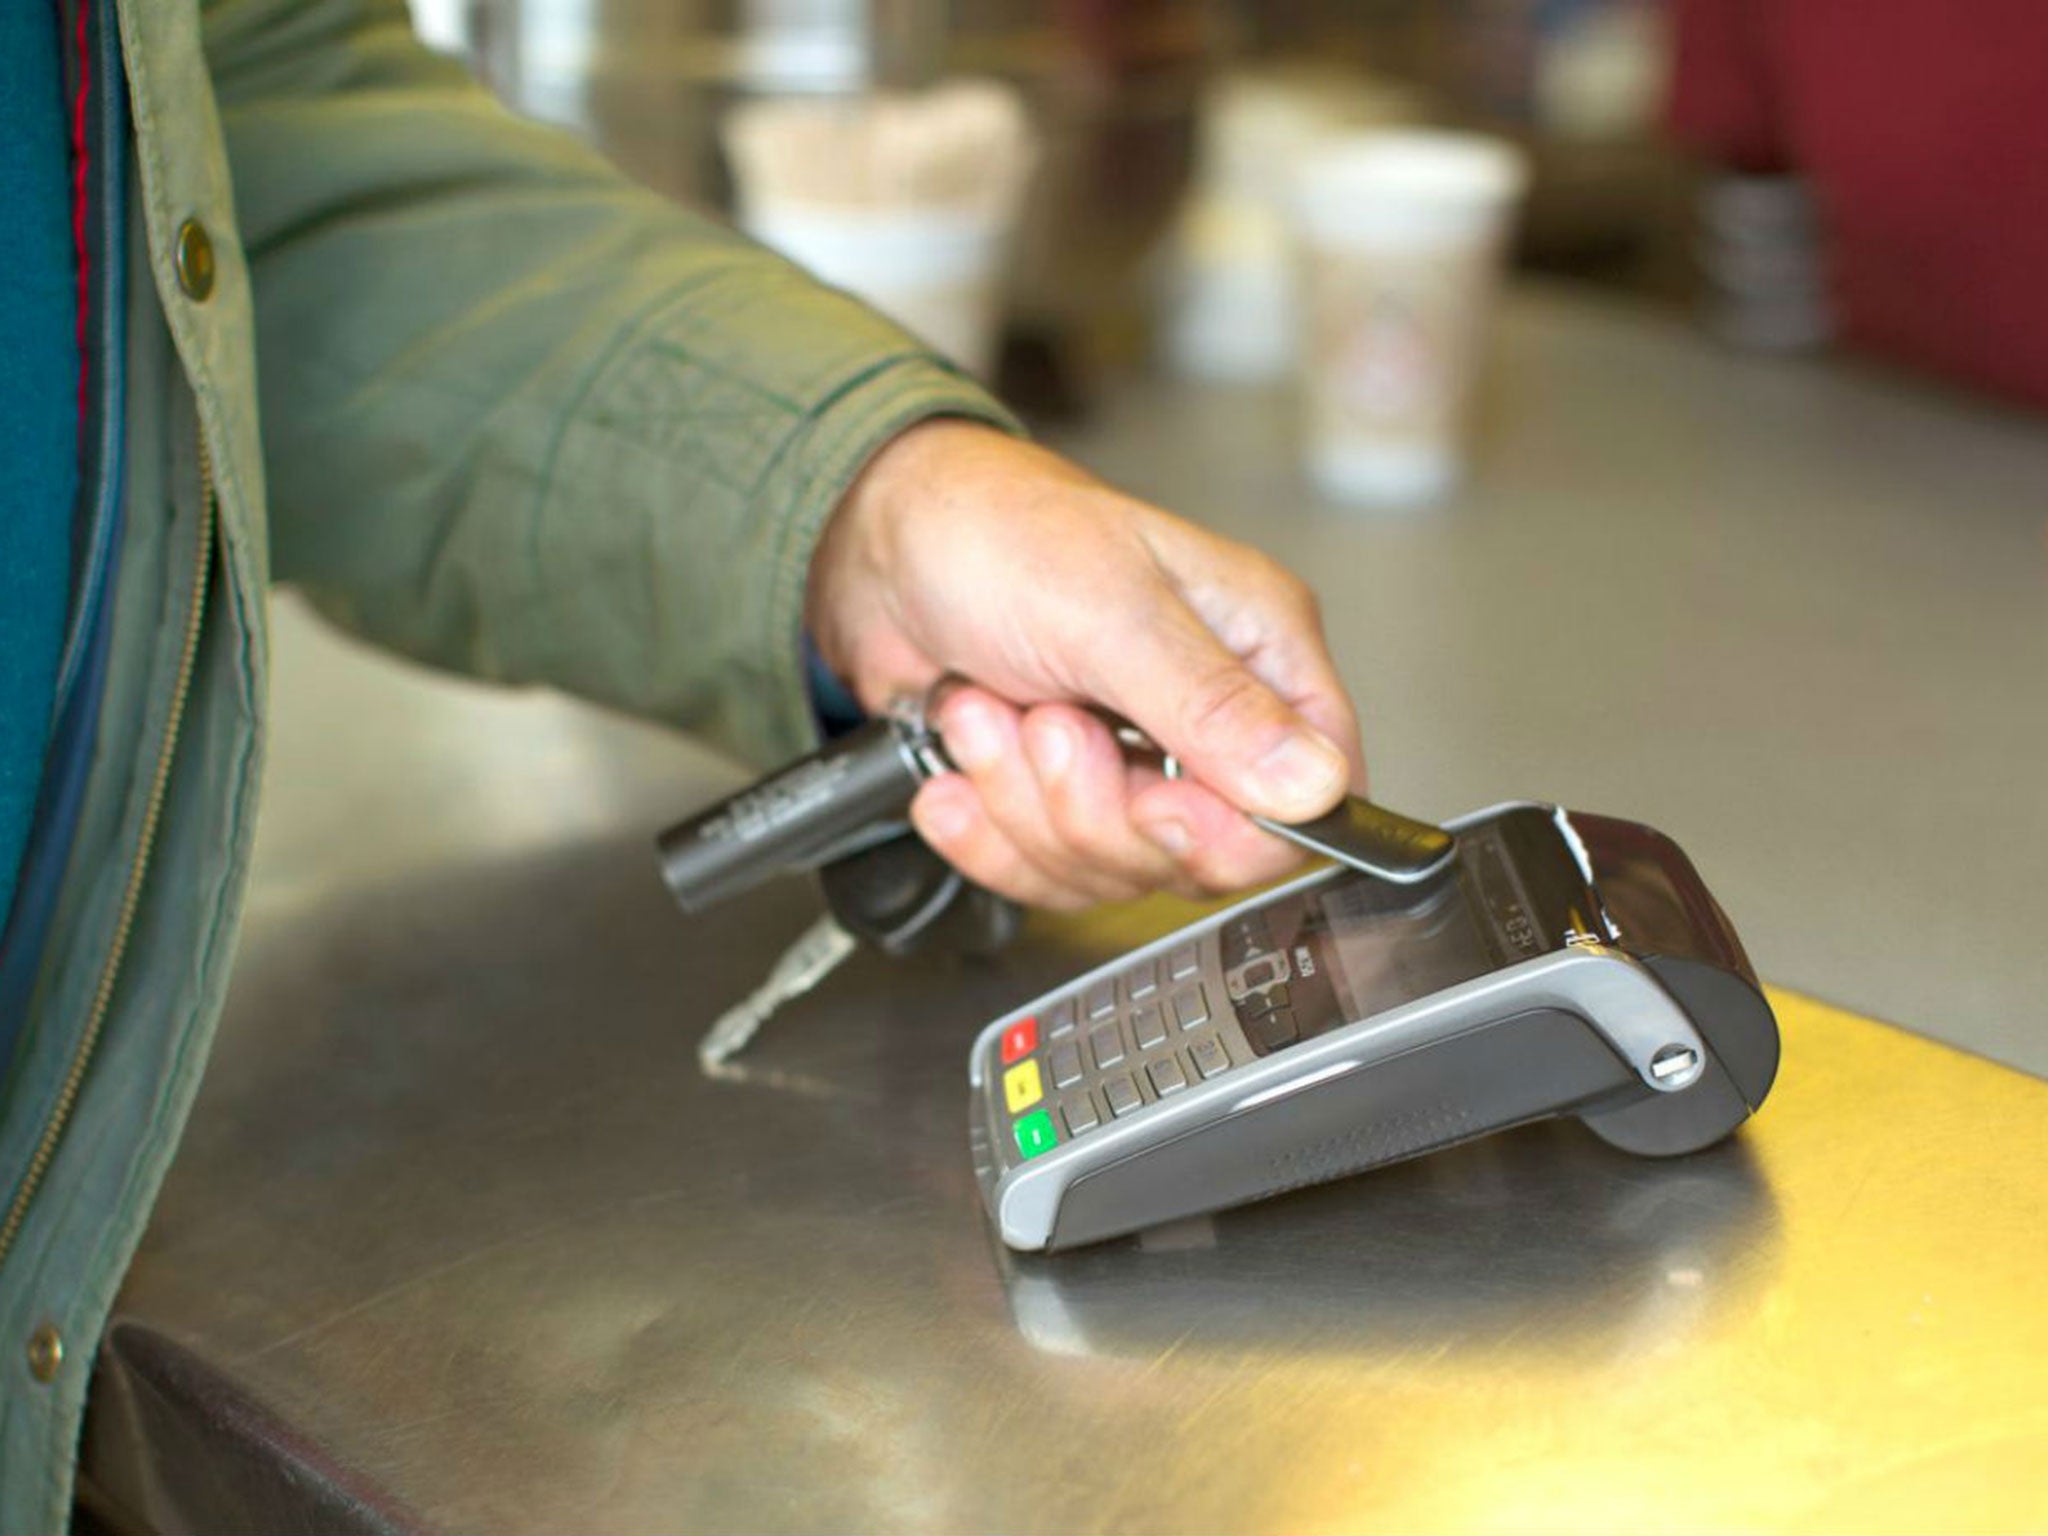 Contactless payments reached £23bn in the first half of 2017